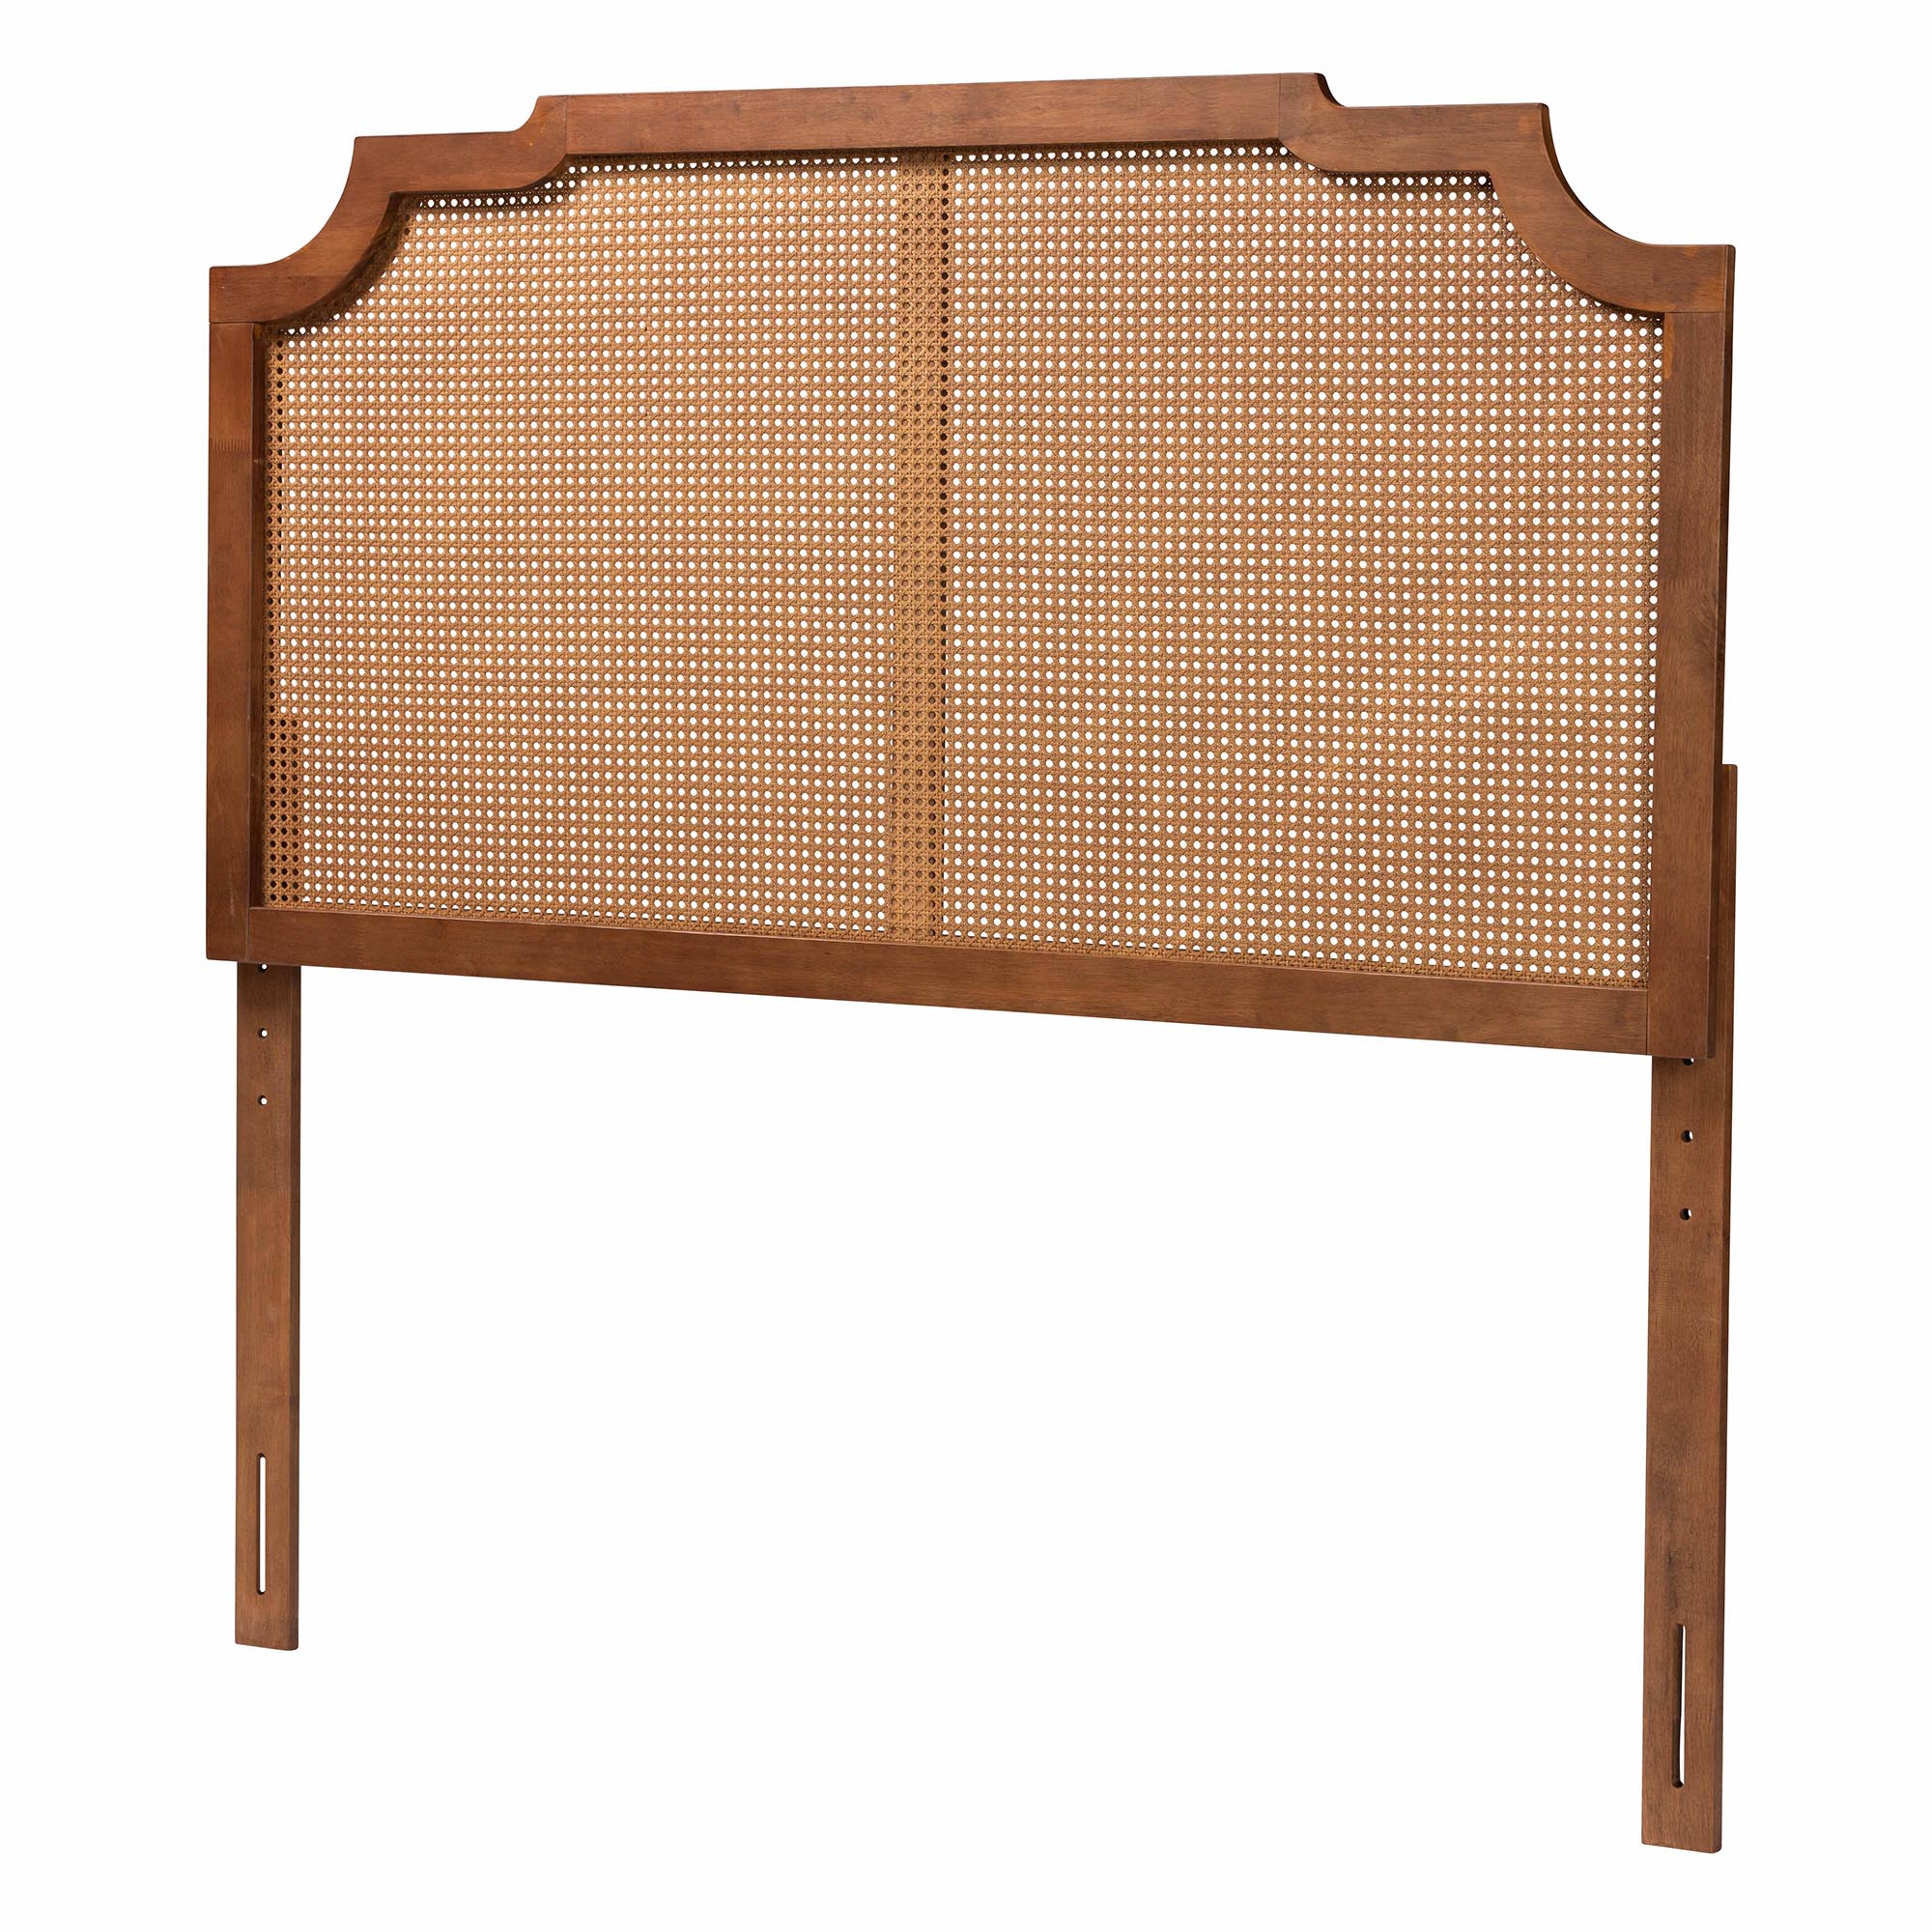 Baxton Studio Fortuna Classic and Traditional Ash Walnut Finished Wood Queen Size Headboard with Rattan